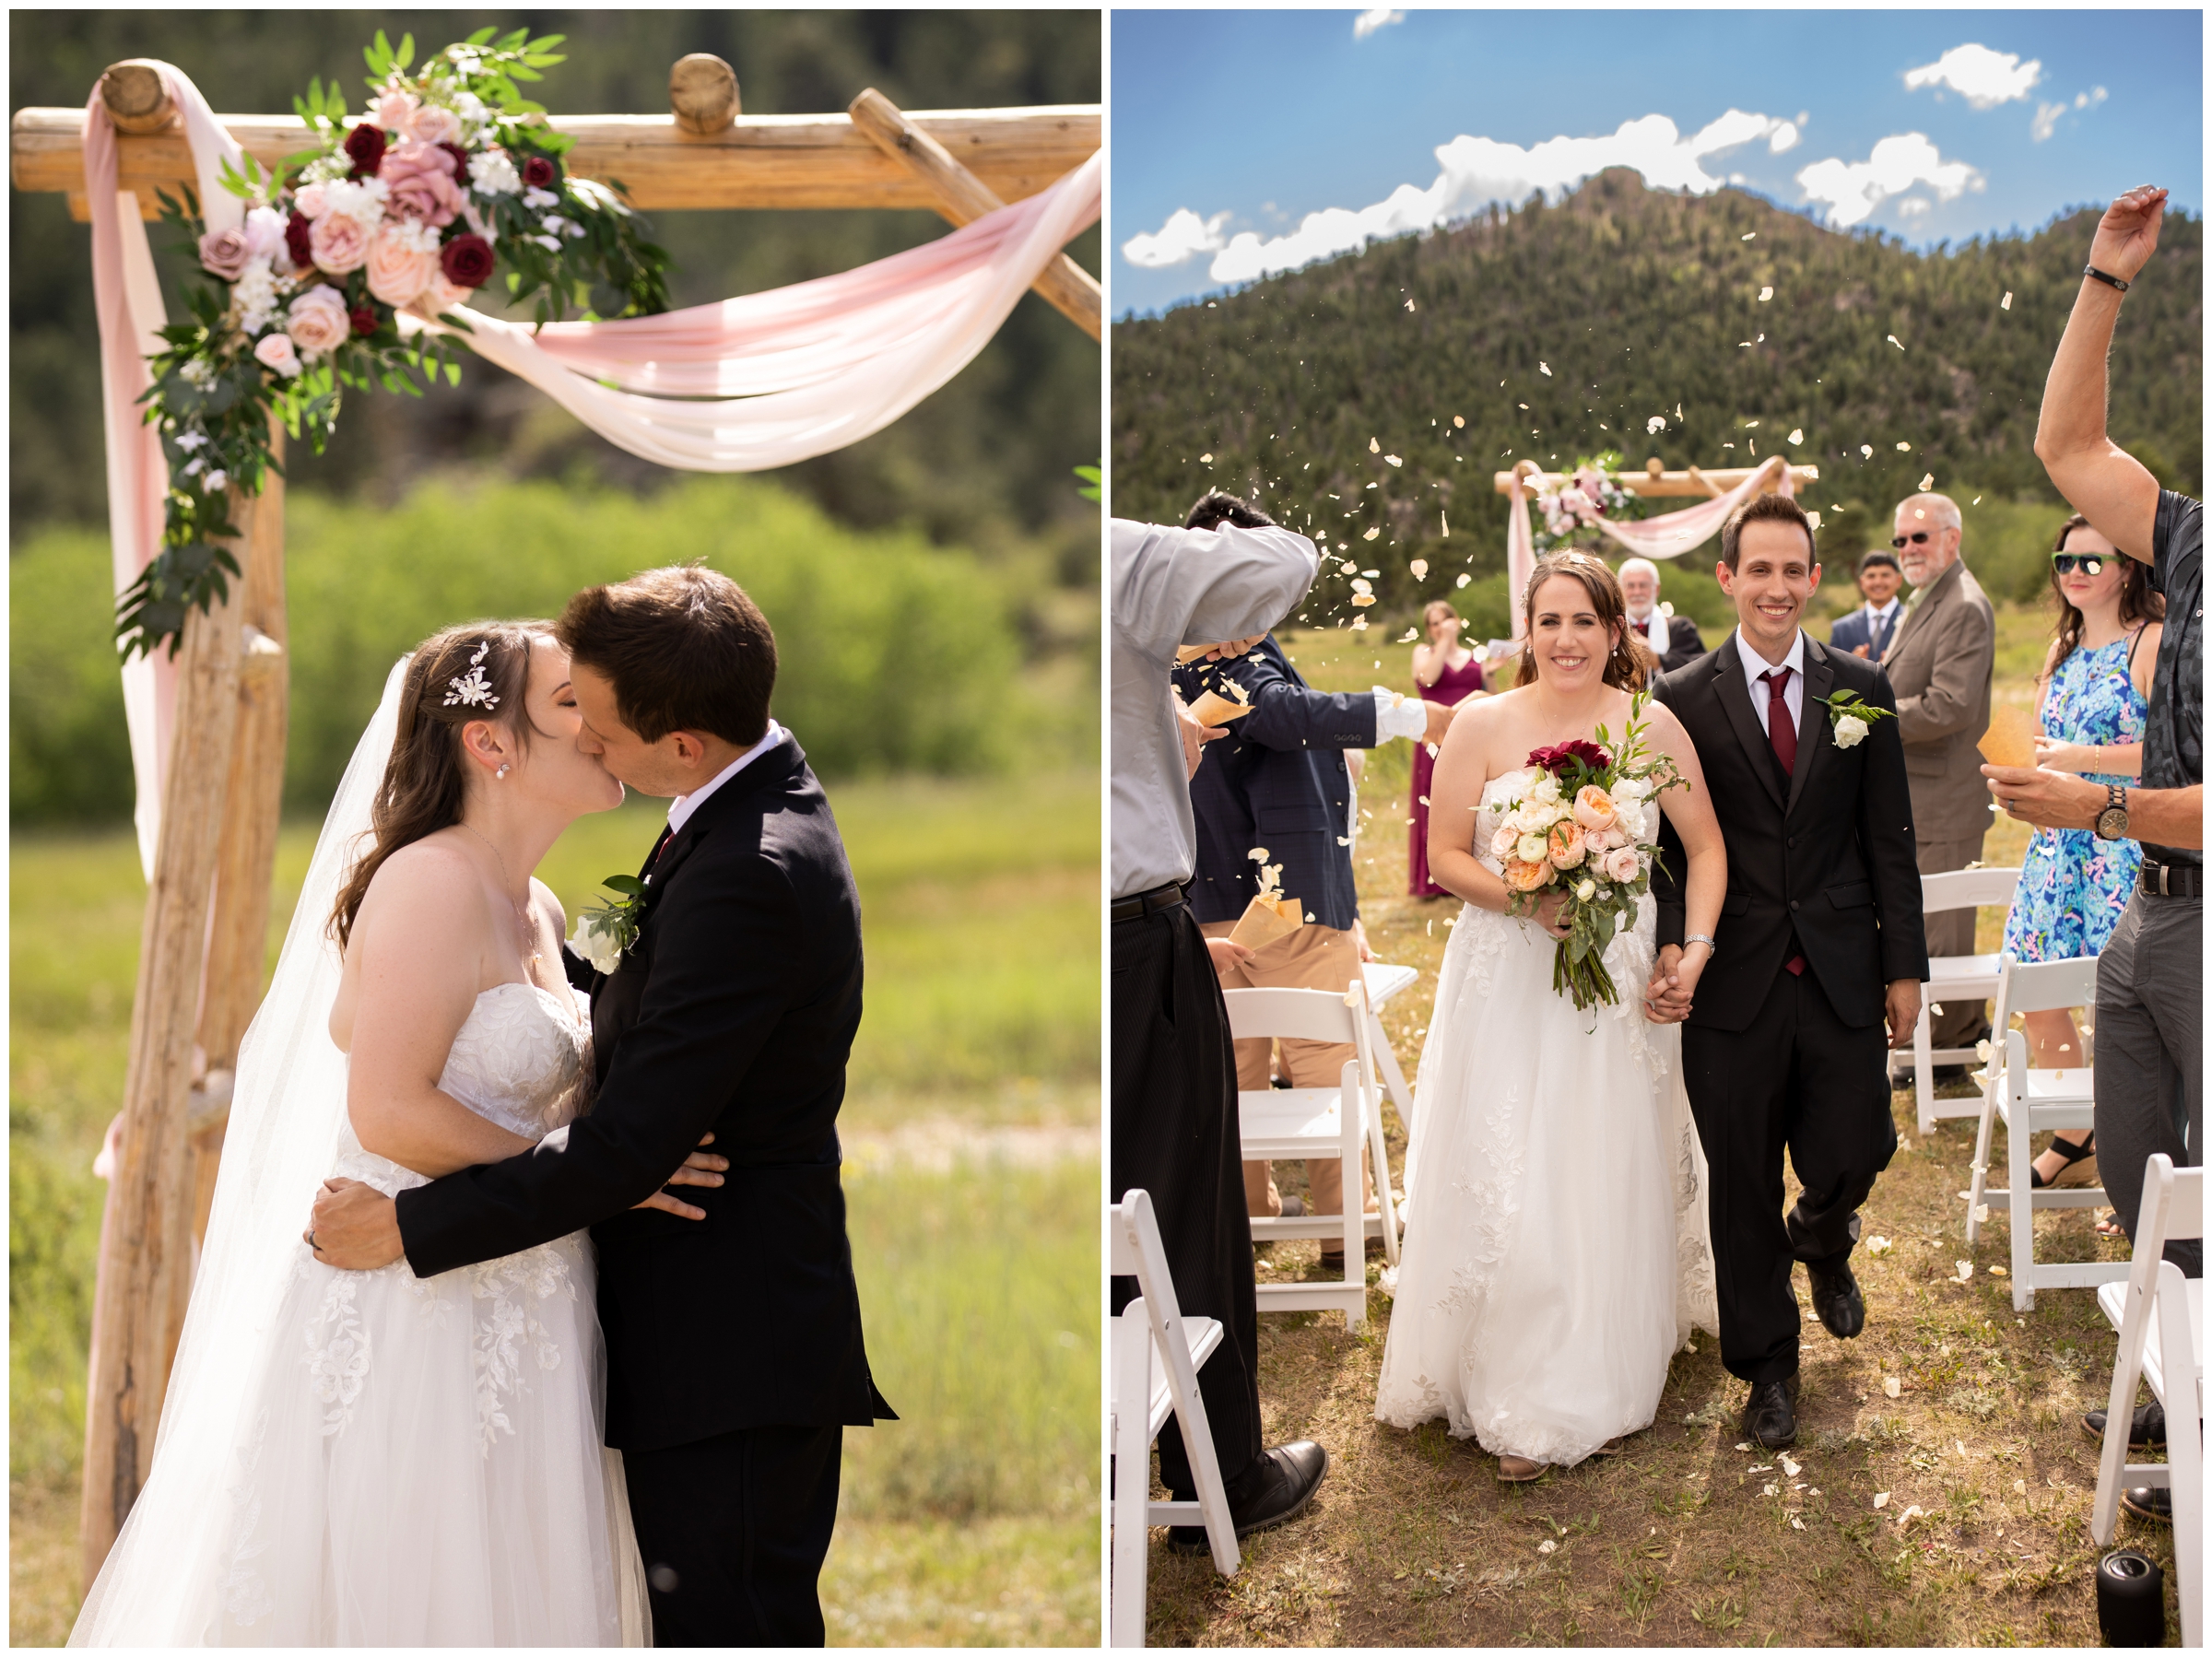 first kiss during outdoor wedding ceremony at Hermit Park Open Space by Estes Park photographer Plum Pretty Photography 